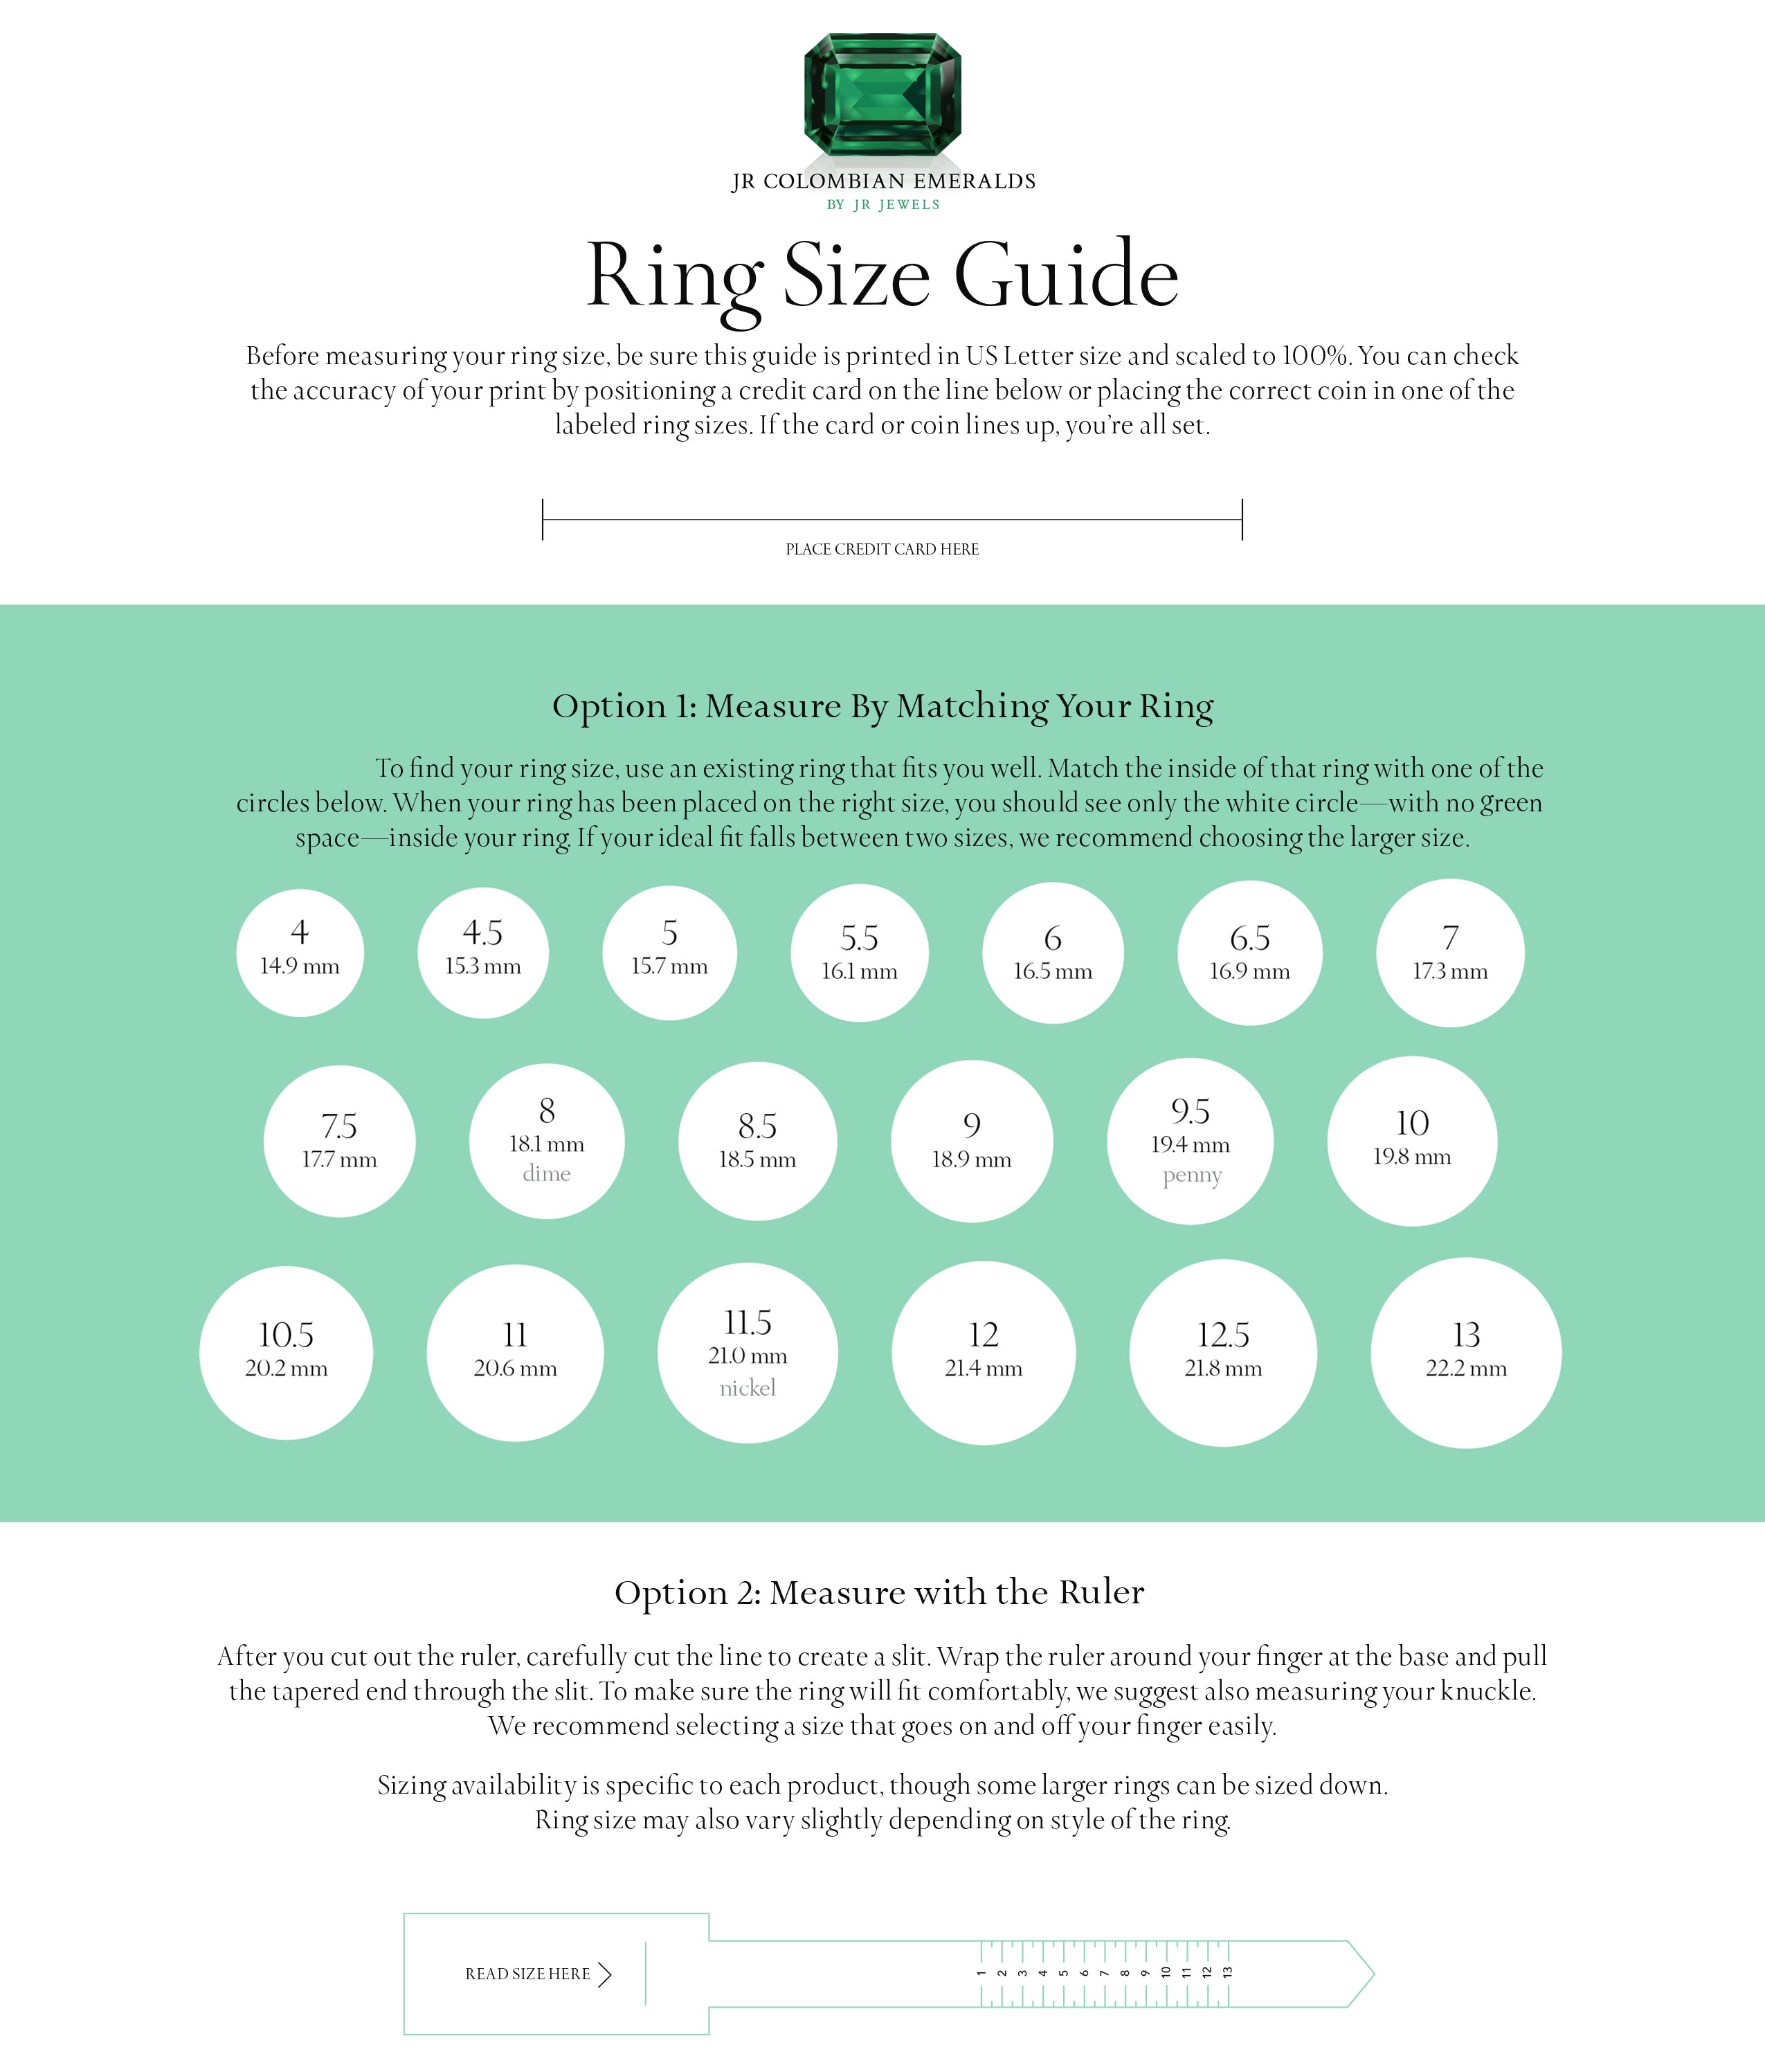 How To Measure Your Ring Size At Home - Bell & Brunt